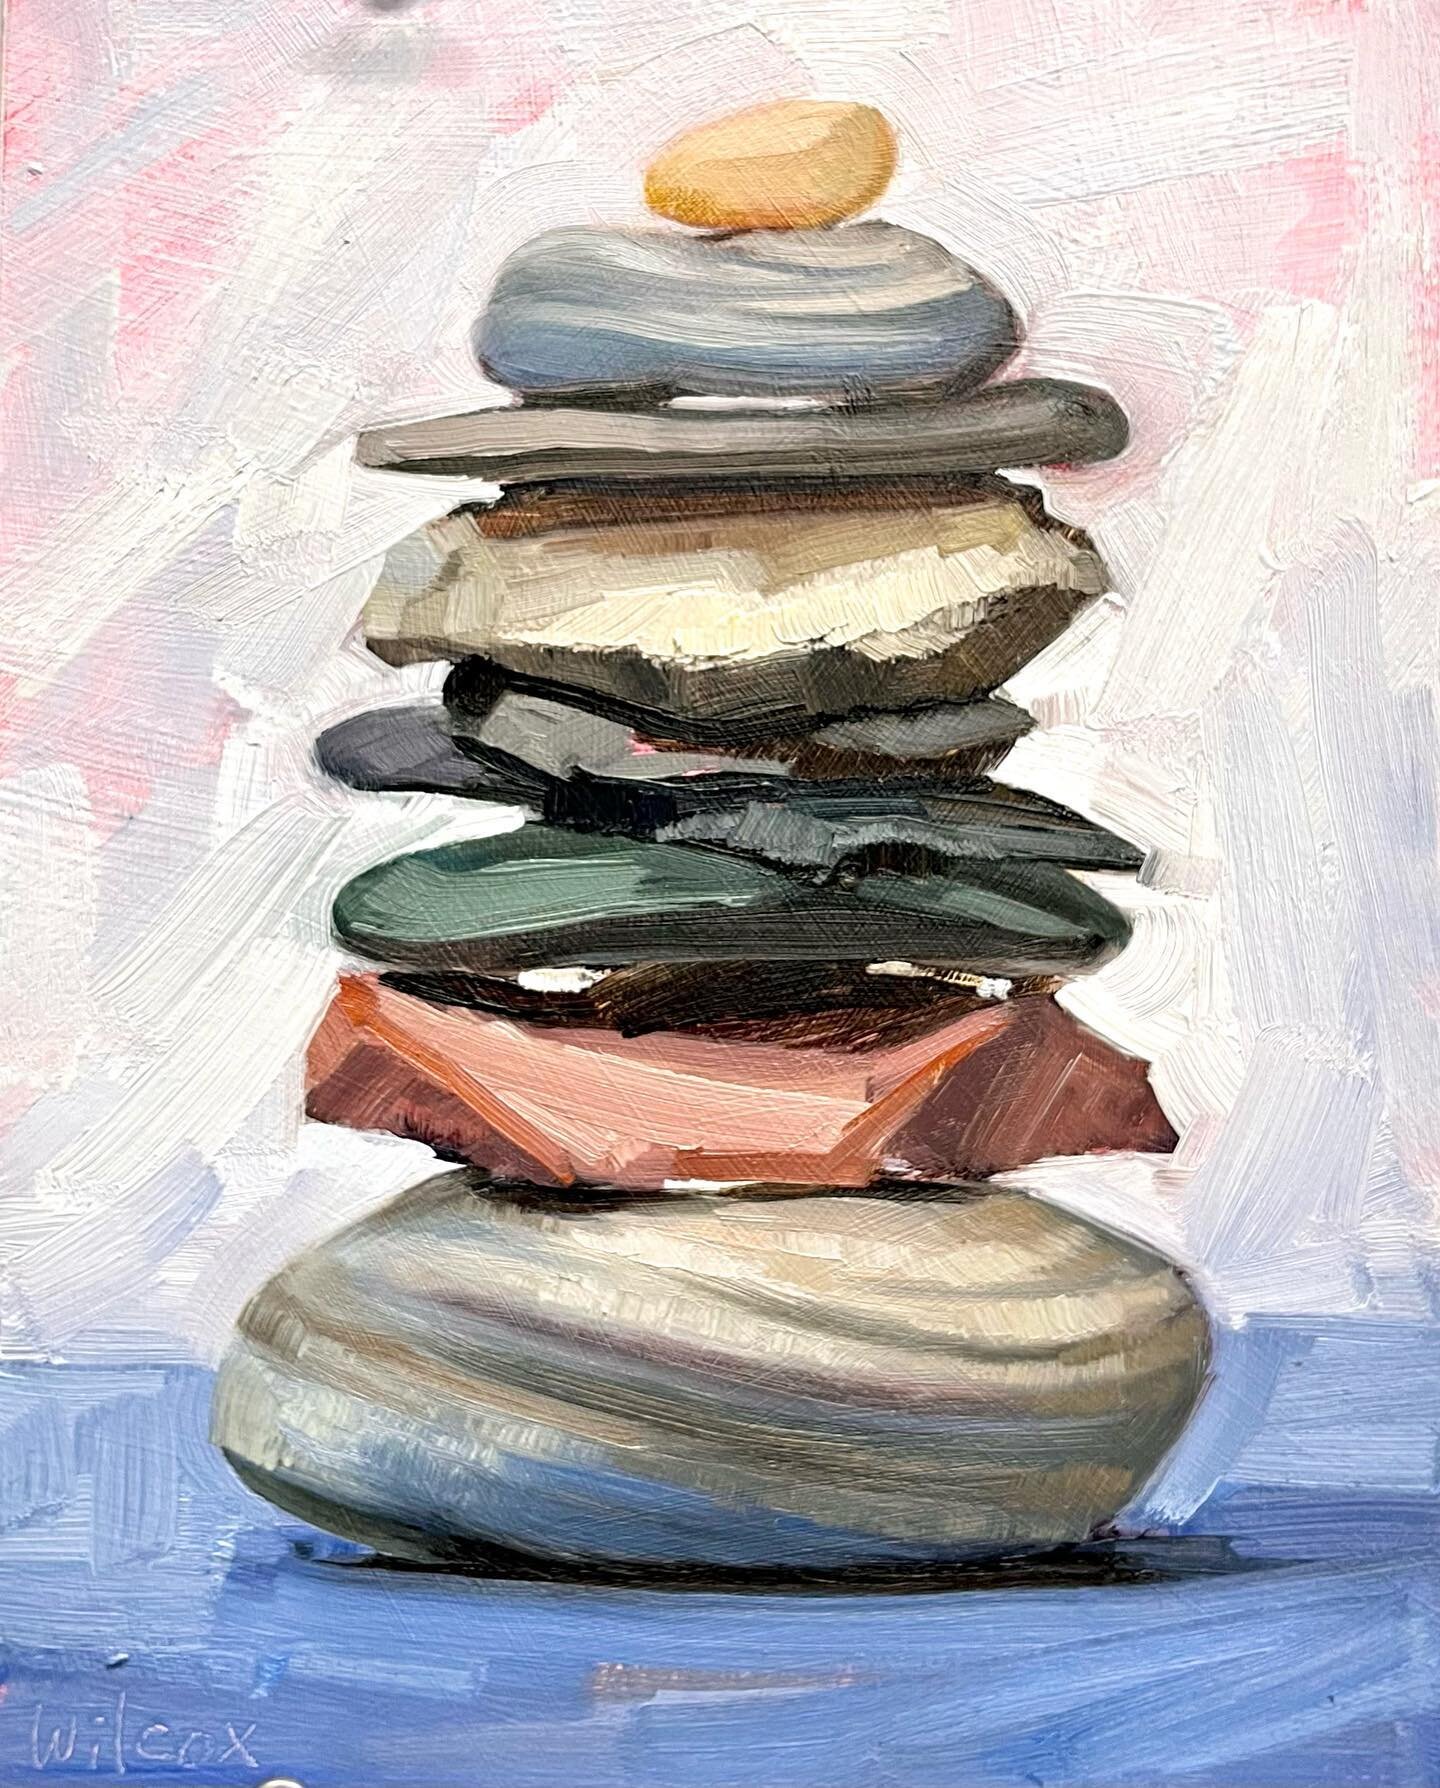 Cairn: a man-made pile (or stack) of stones raised for a purpose, usually as a marker or as a burial mound. 🖤#balance